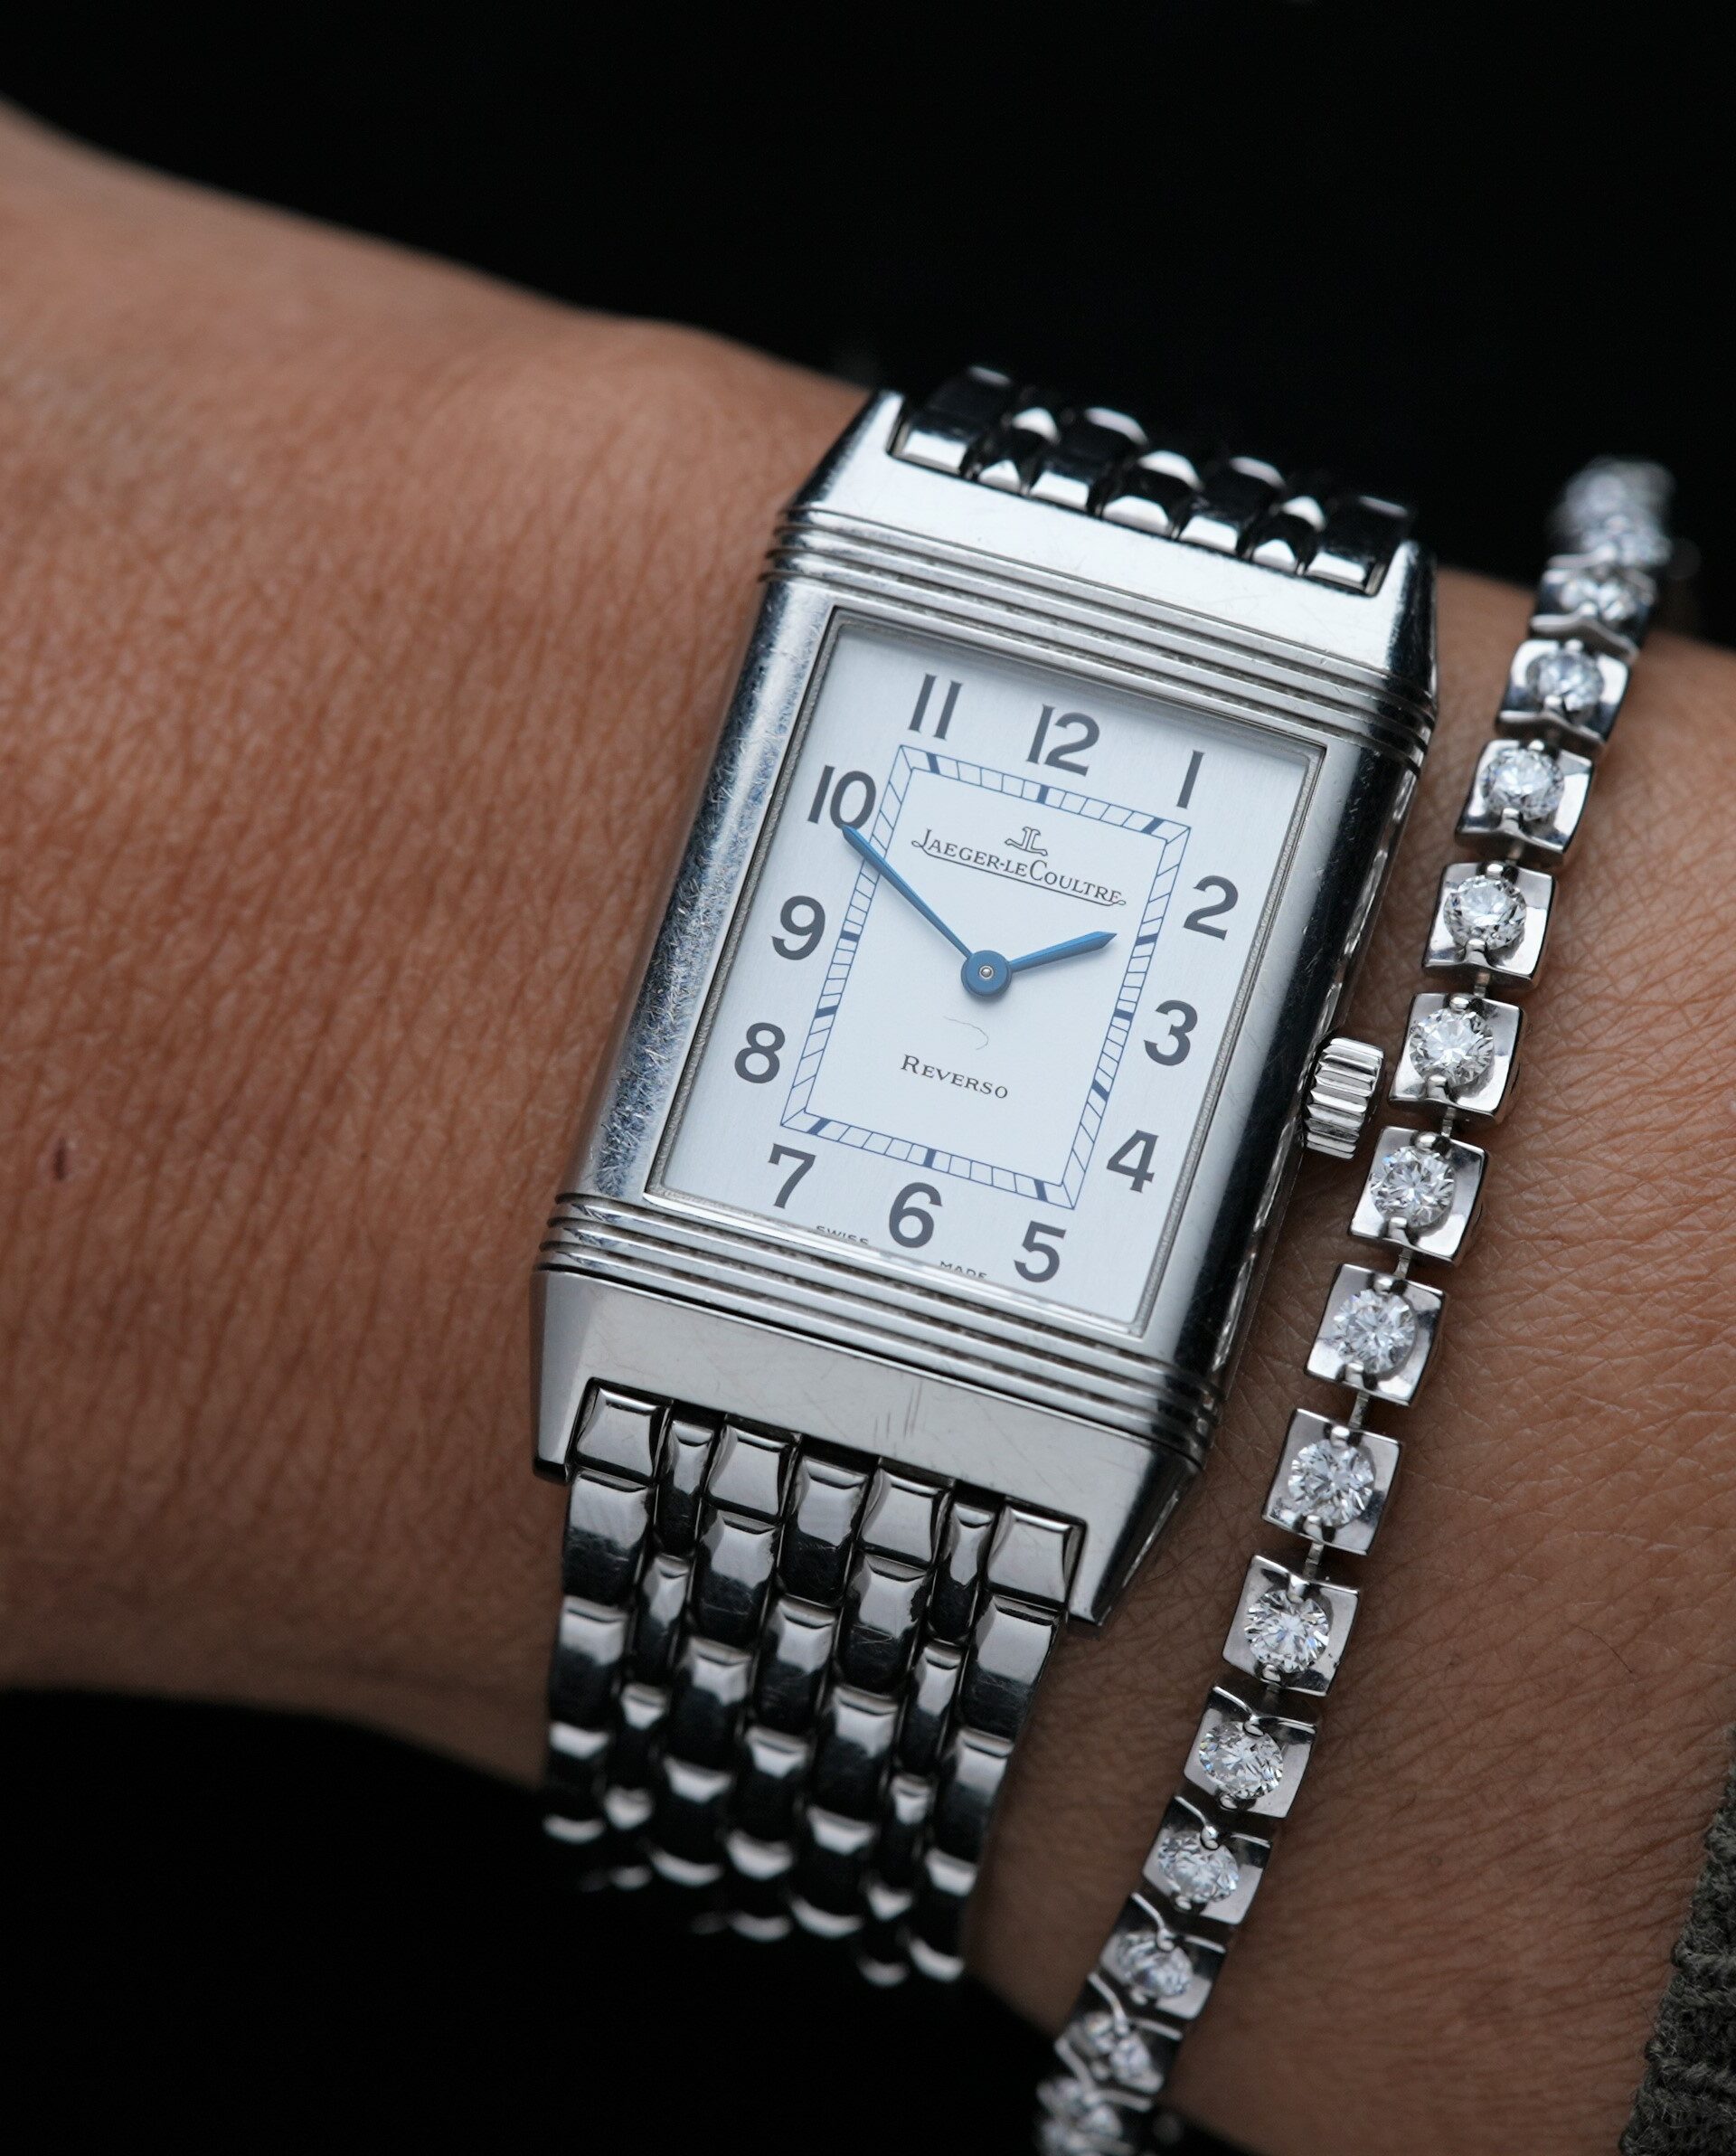 Jaeger-LeCoultre Reverso Classique 252.8.86 watch featured on the wrist.